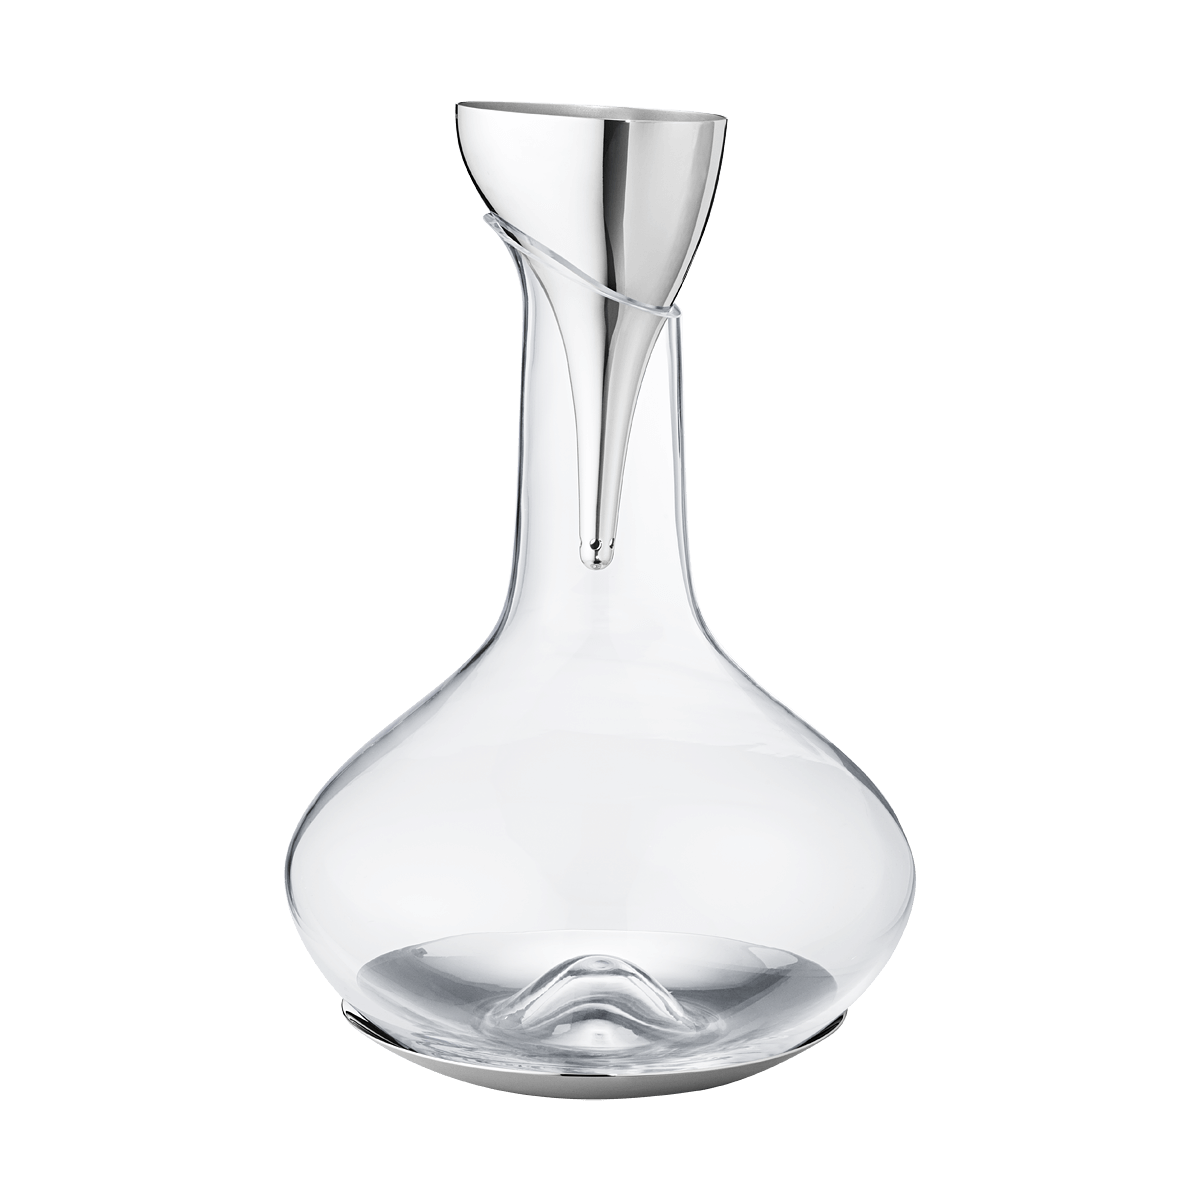 georg jensen sky wine decanter aerating funnel with filter stainless steel 10019304AK0V